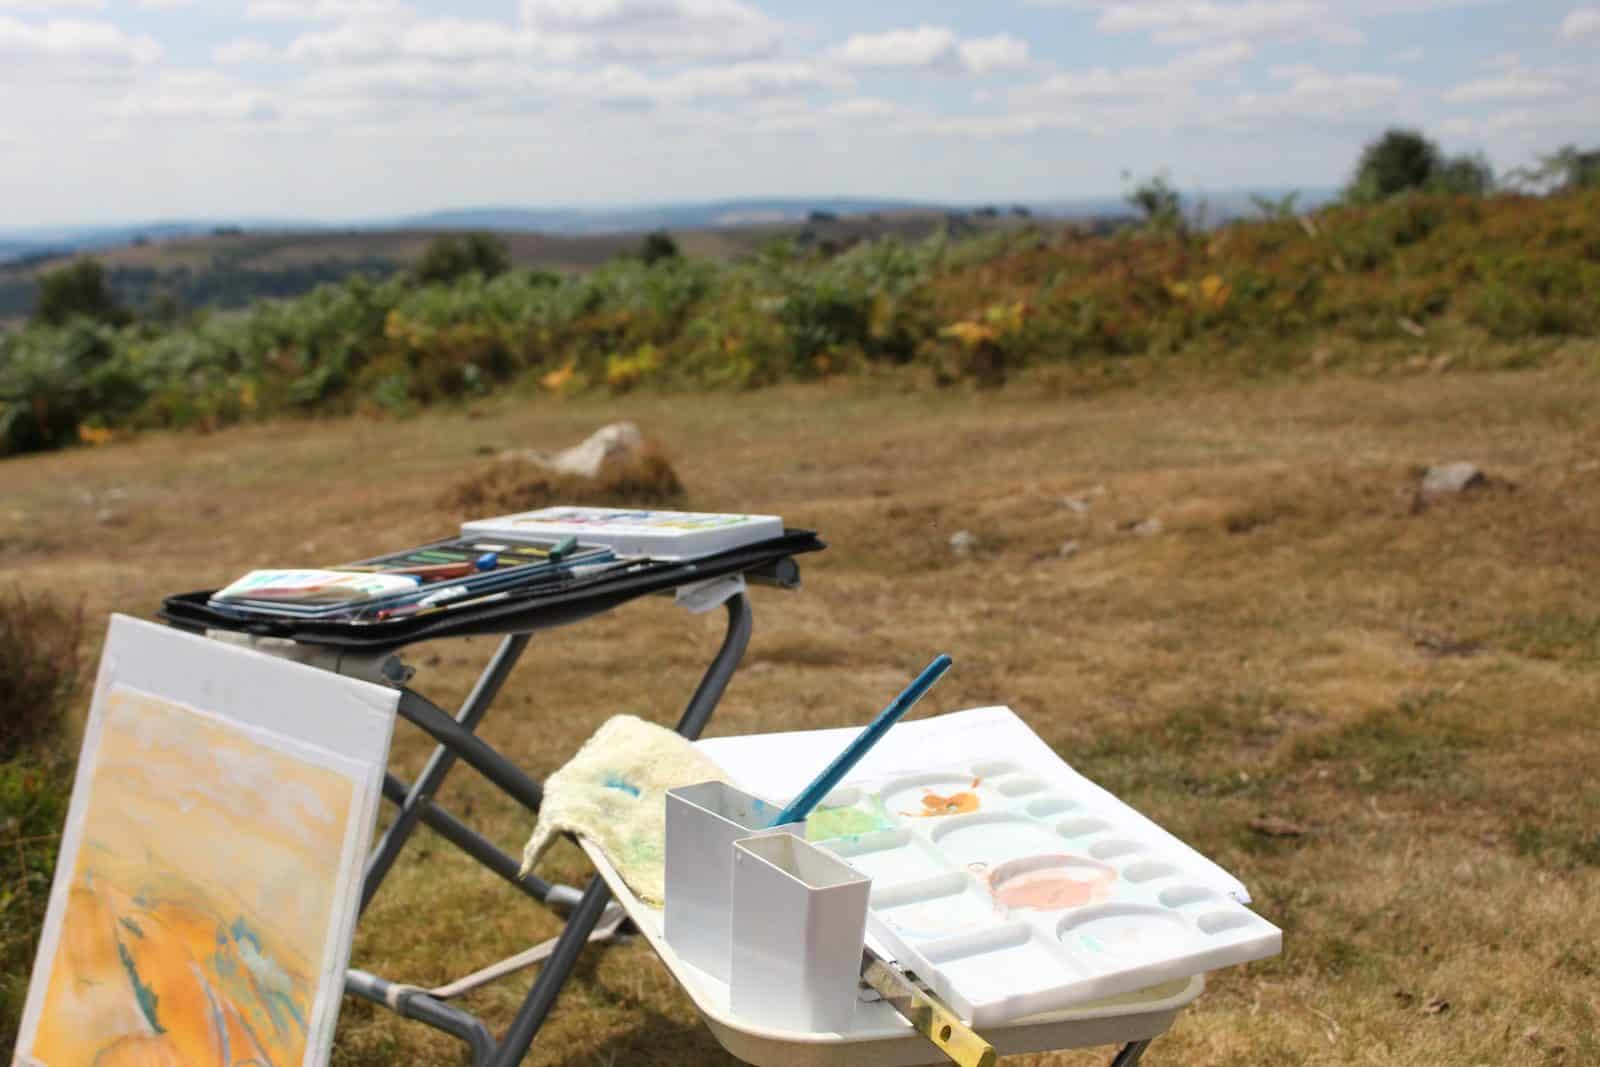 An artists set up out in the countryside